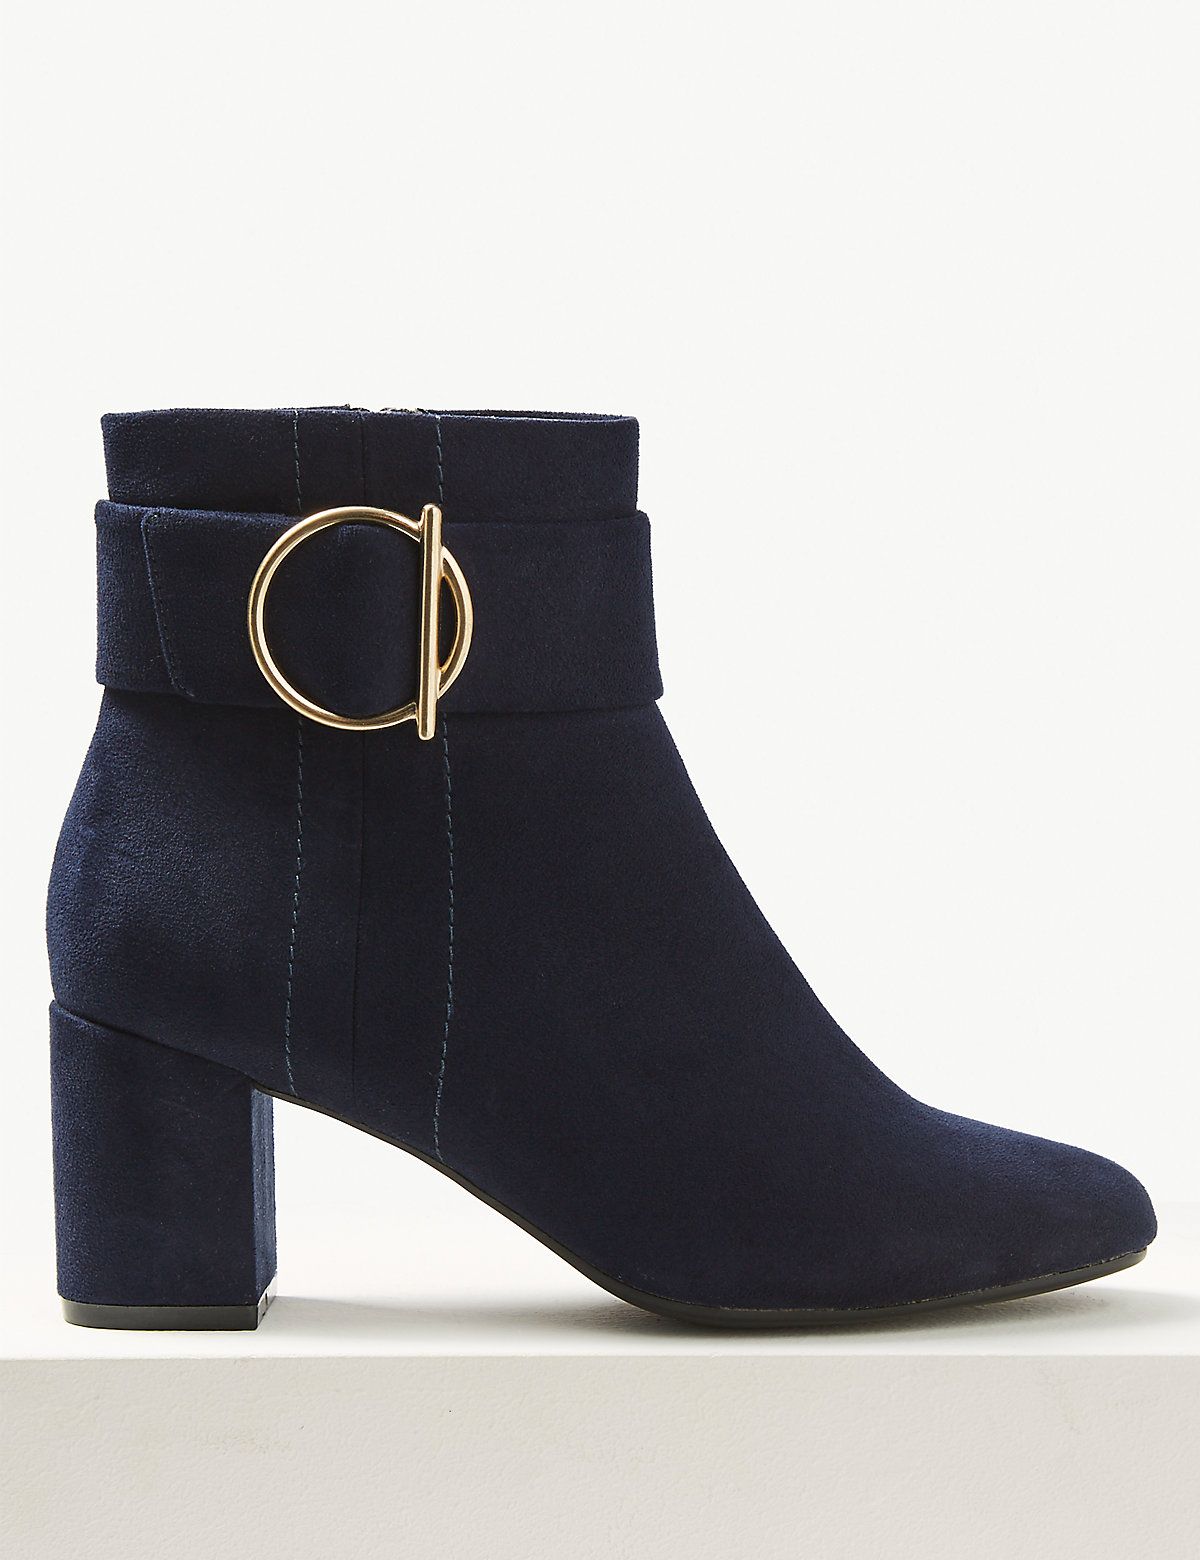 The best statement M\u0026S ankle boots to 